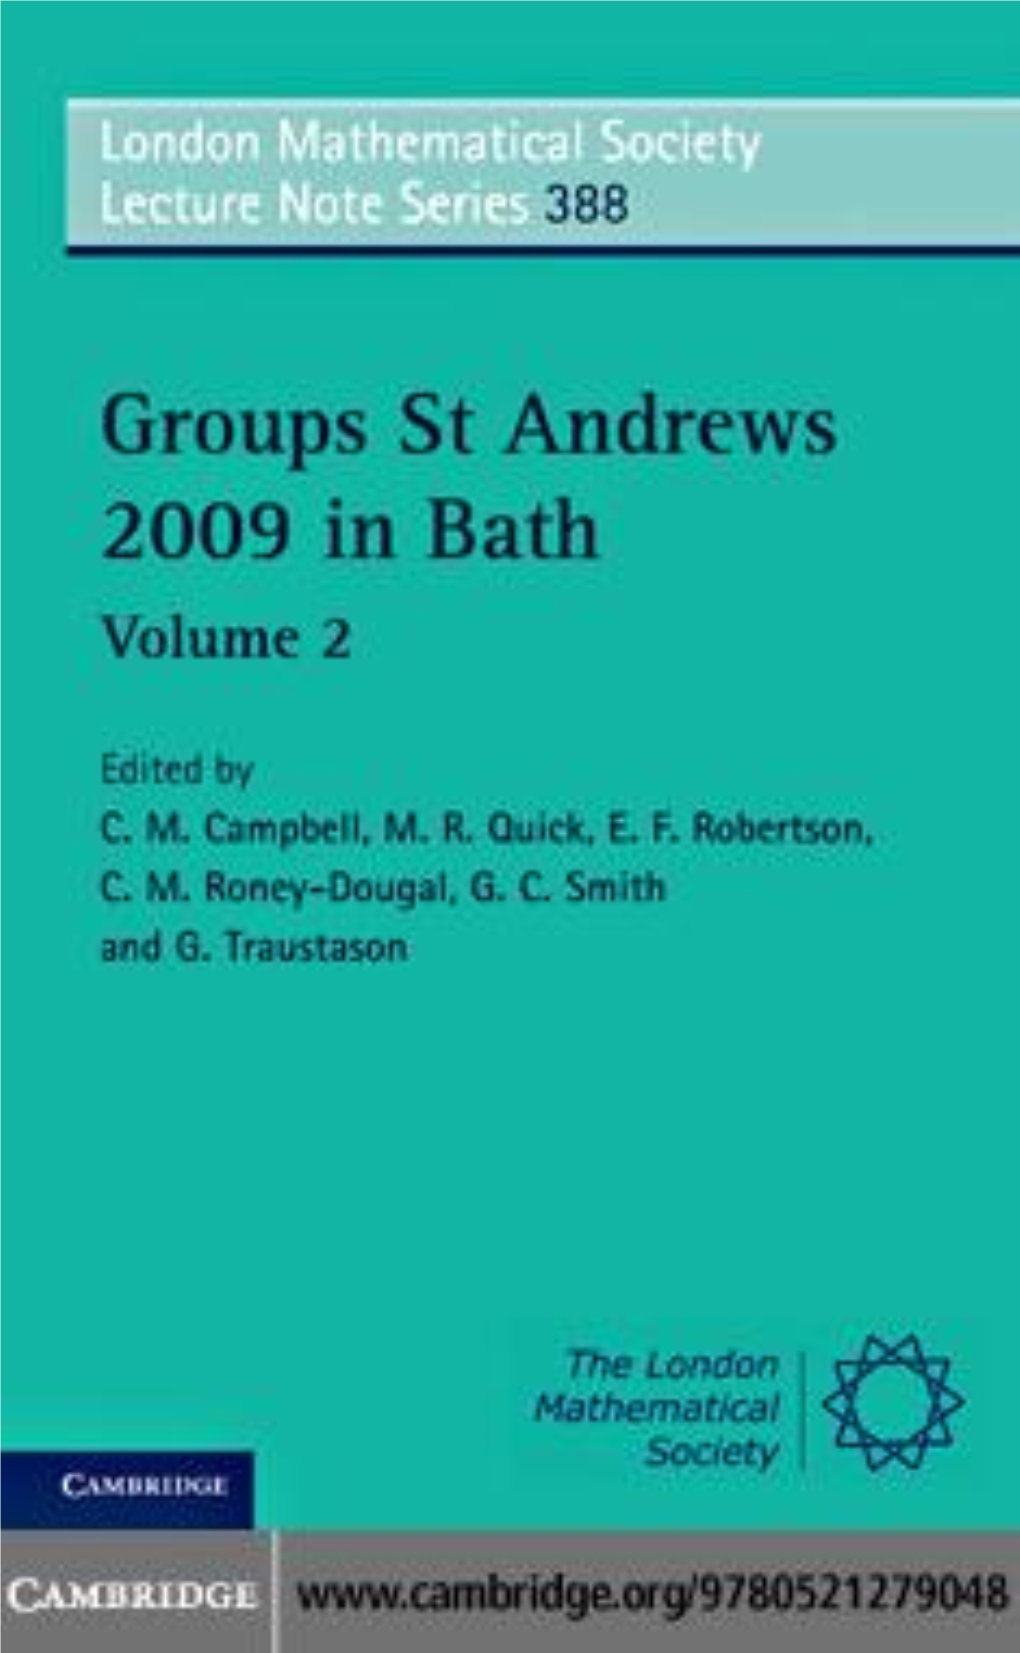 Groups St Andrews 2009 in Bath: Volume 2 (London Mathematical